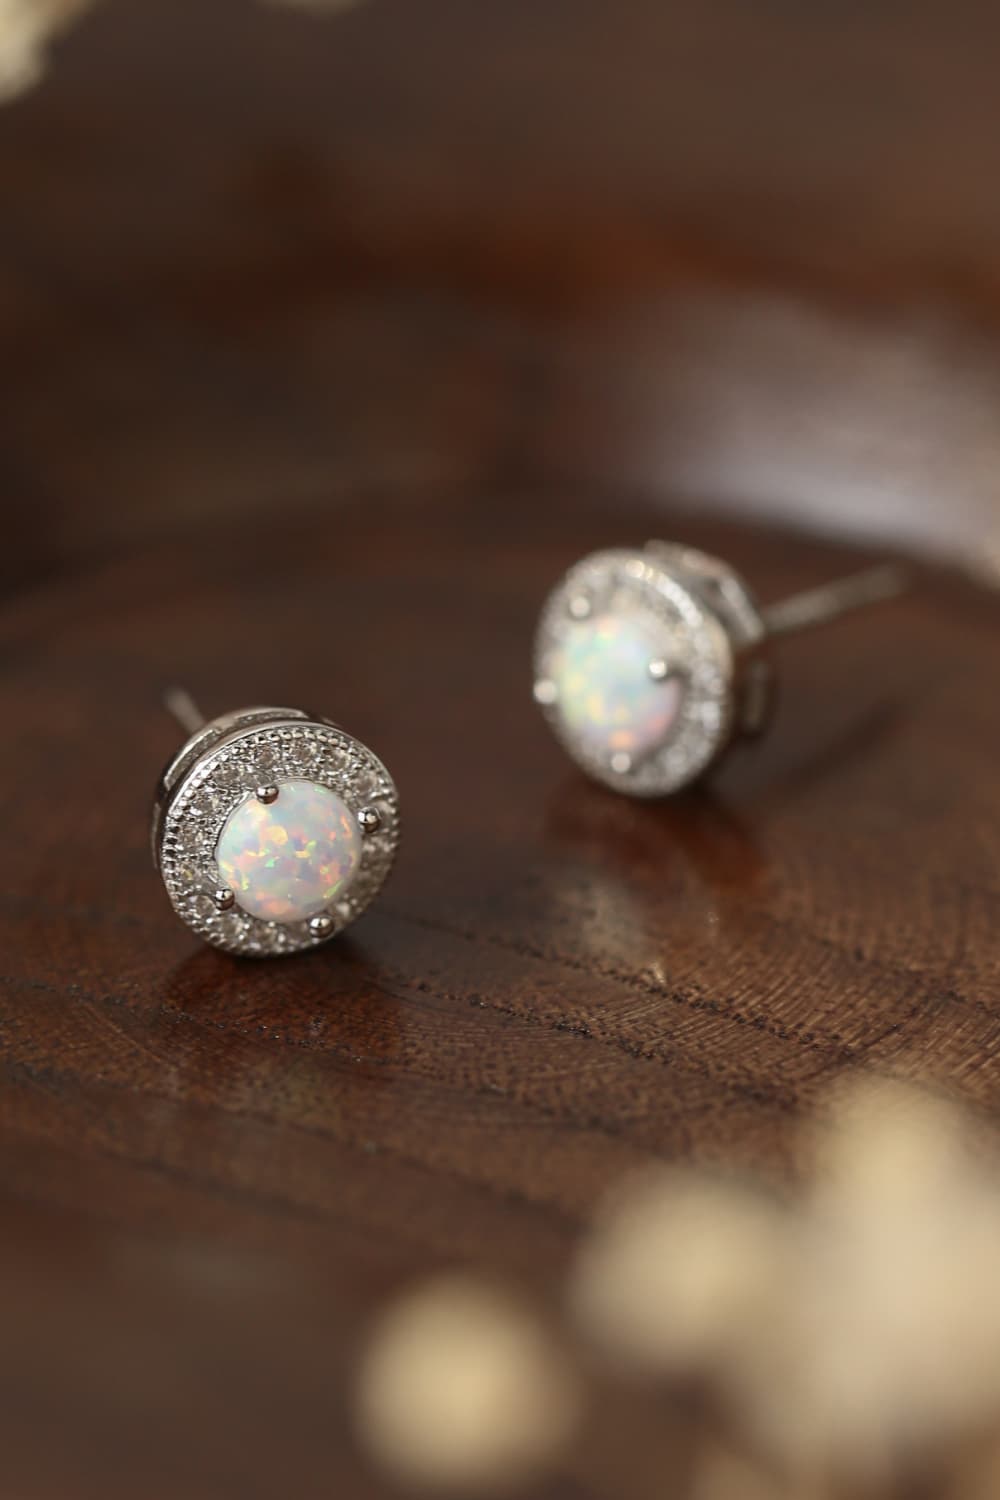 Opal Starry Nights - Ignite Your Passion with Mesmerizing Australian Opals - Lightweight and Comfortable Earrings that Complement Any Outfit. - Guy Christopher